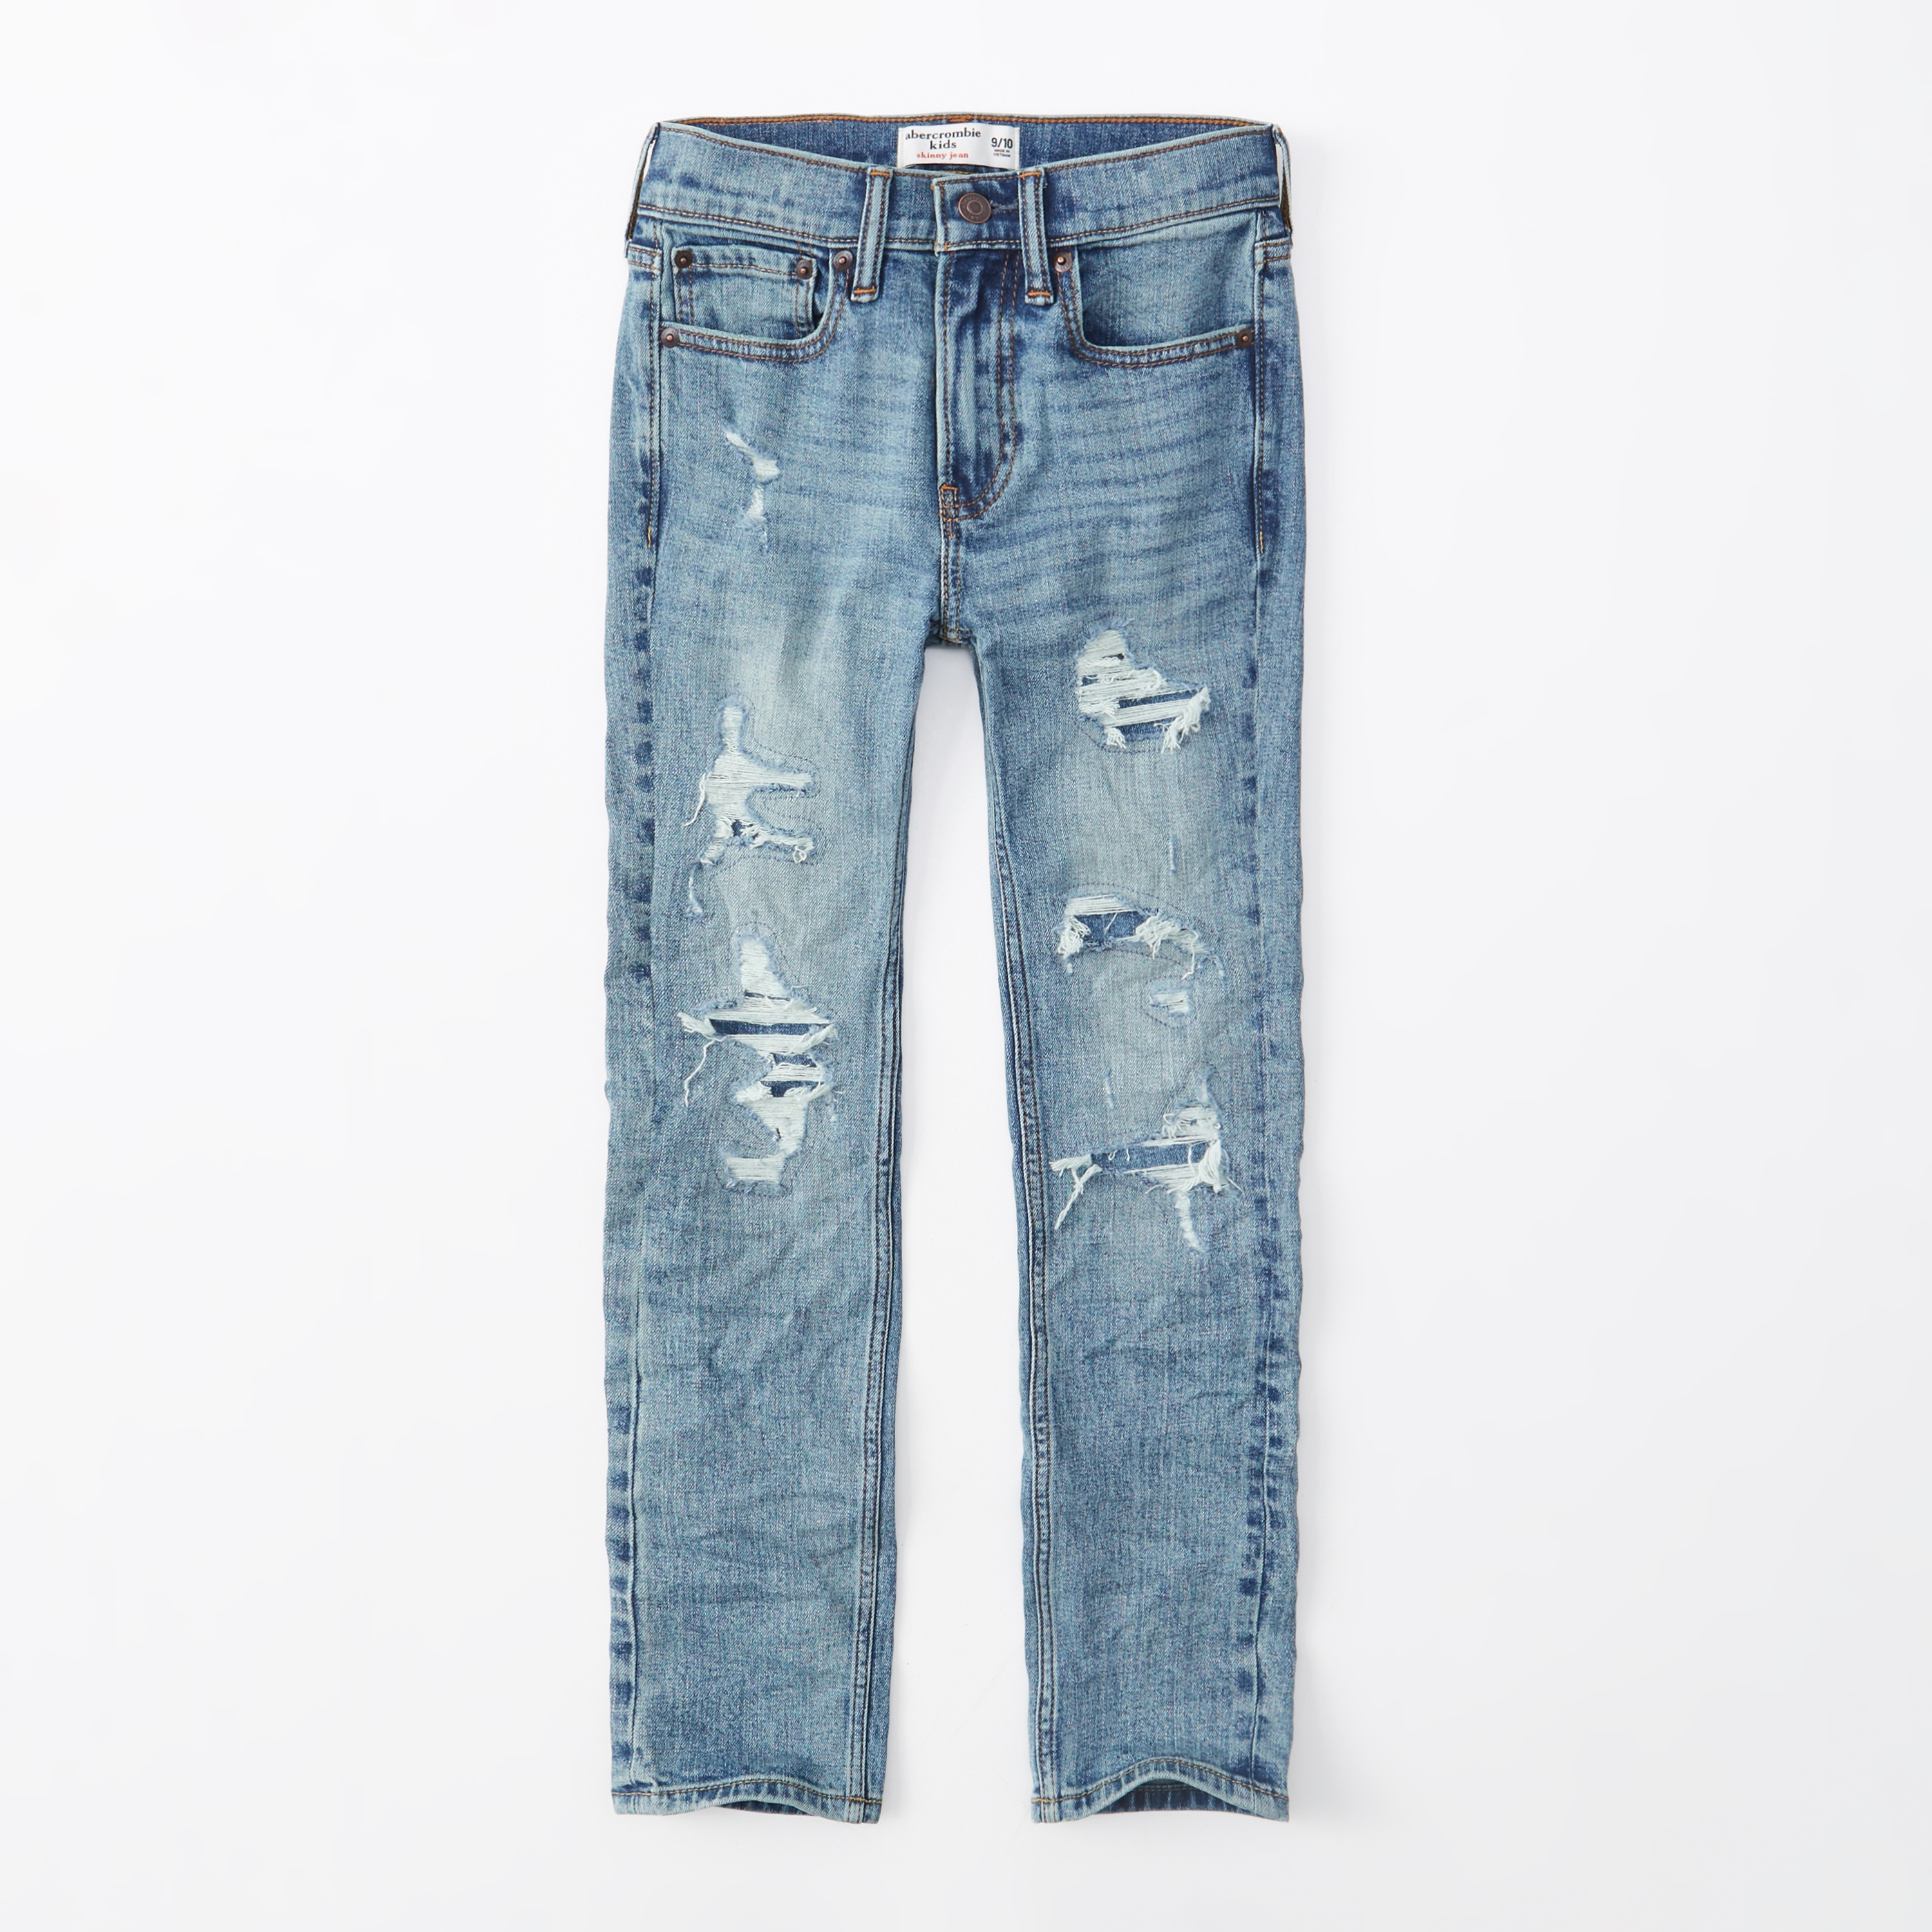 abercrombie kids ripped jeans